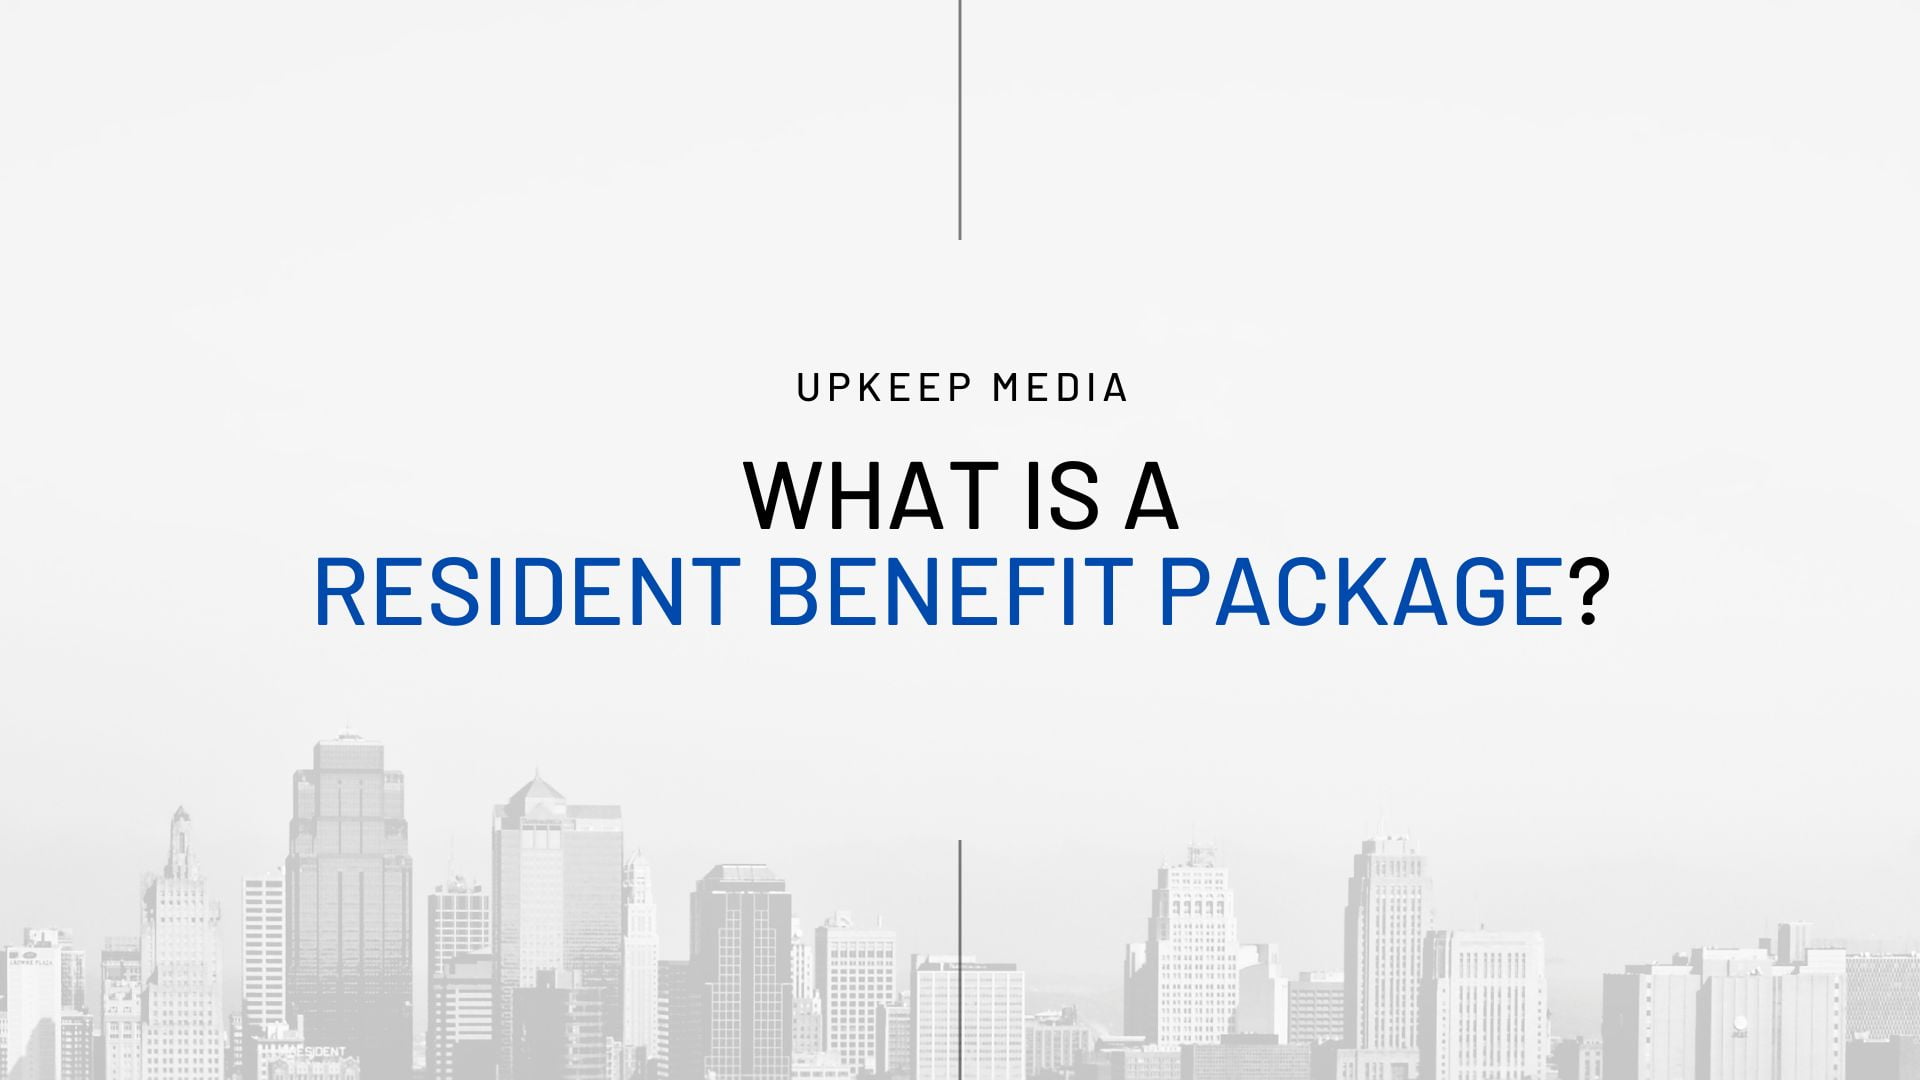 What is a Resident Benefit Package?